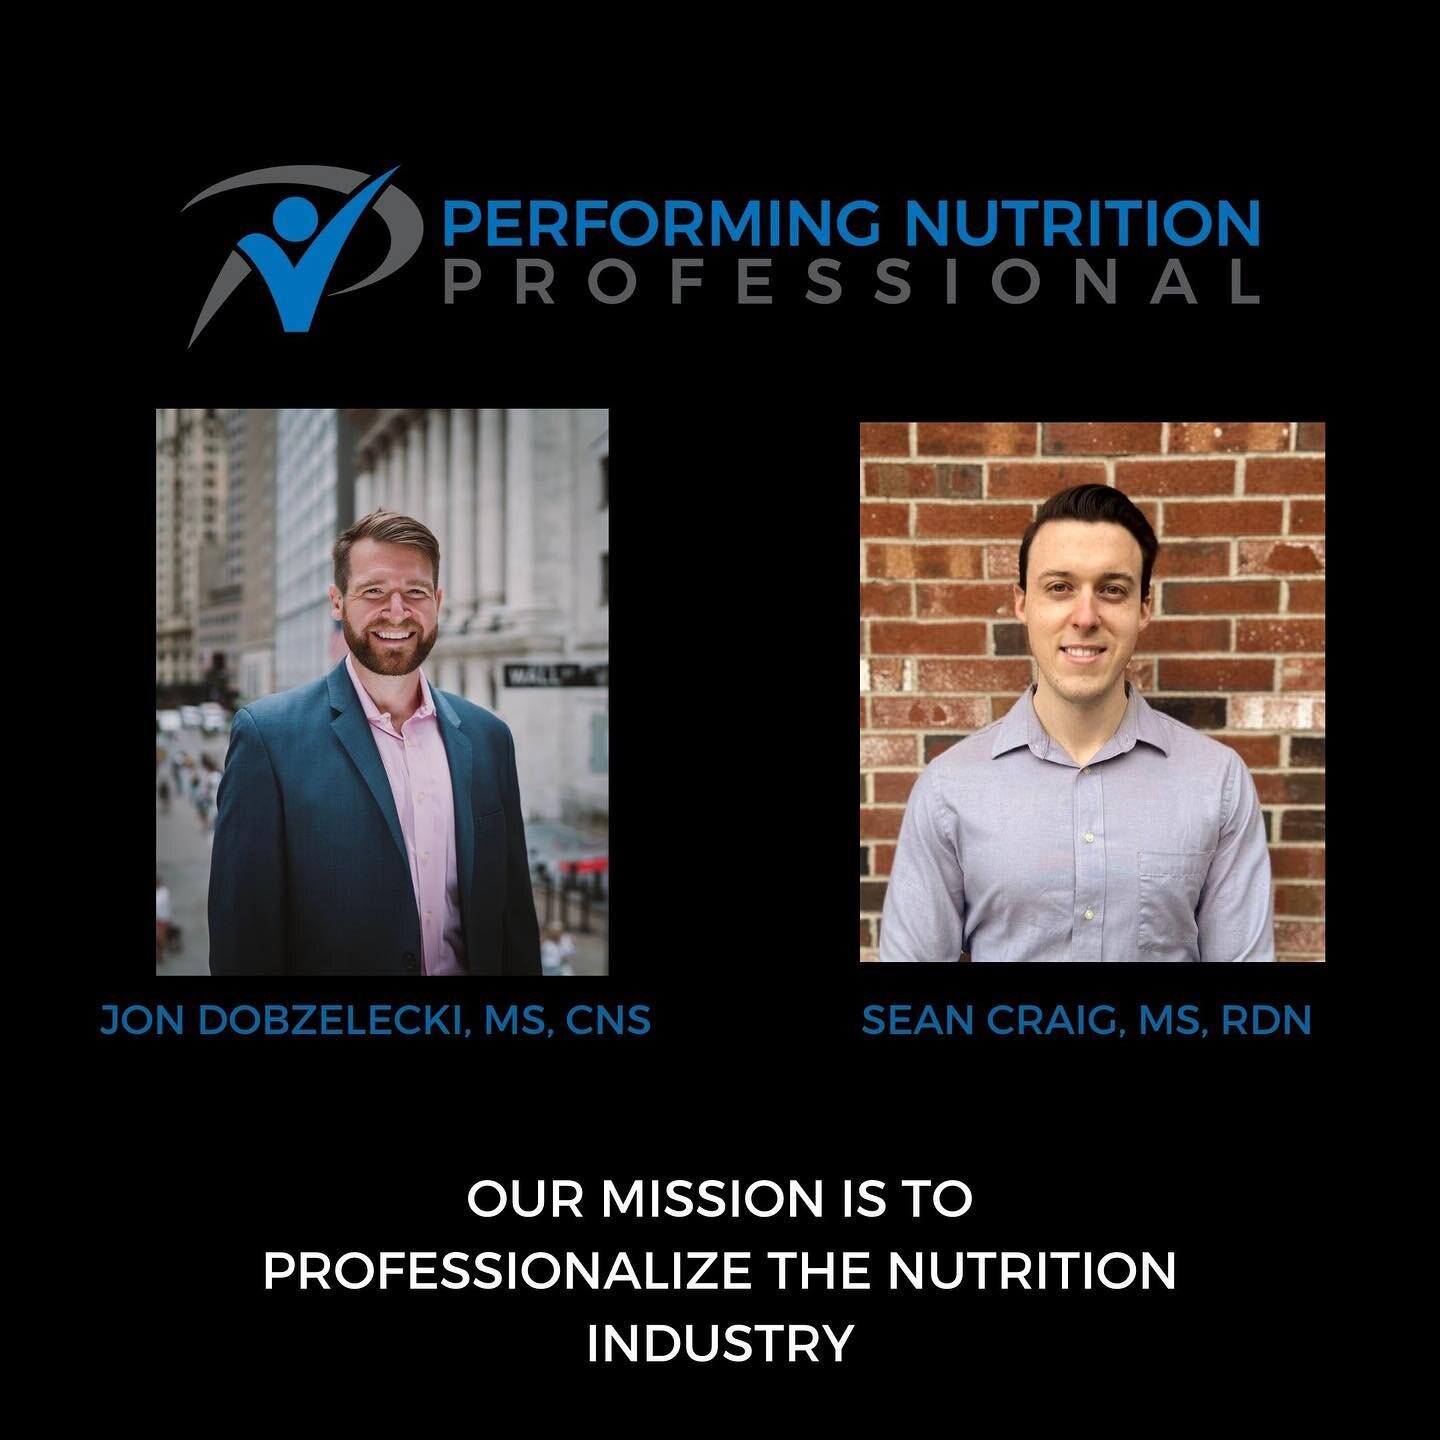 I started taking clients for nutrition coaching over 4 years ago, and since then have helped over 500 people attain their goals

About 10 months ago, @seancraignutrition and I began thinking up an idea of how we could make a larger impact in the live